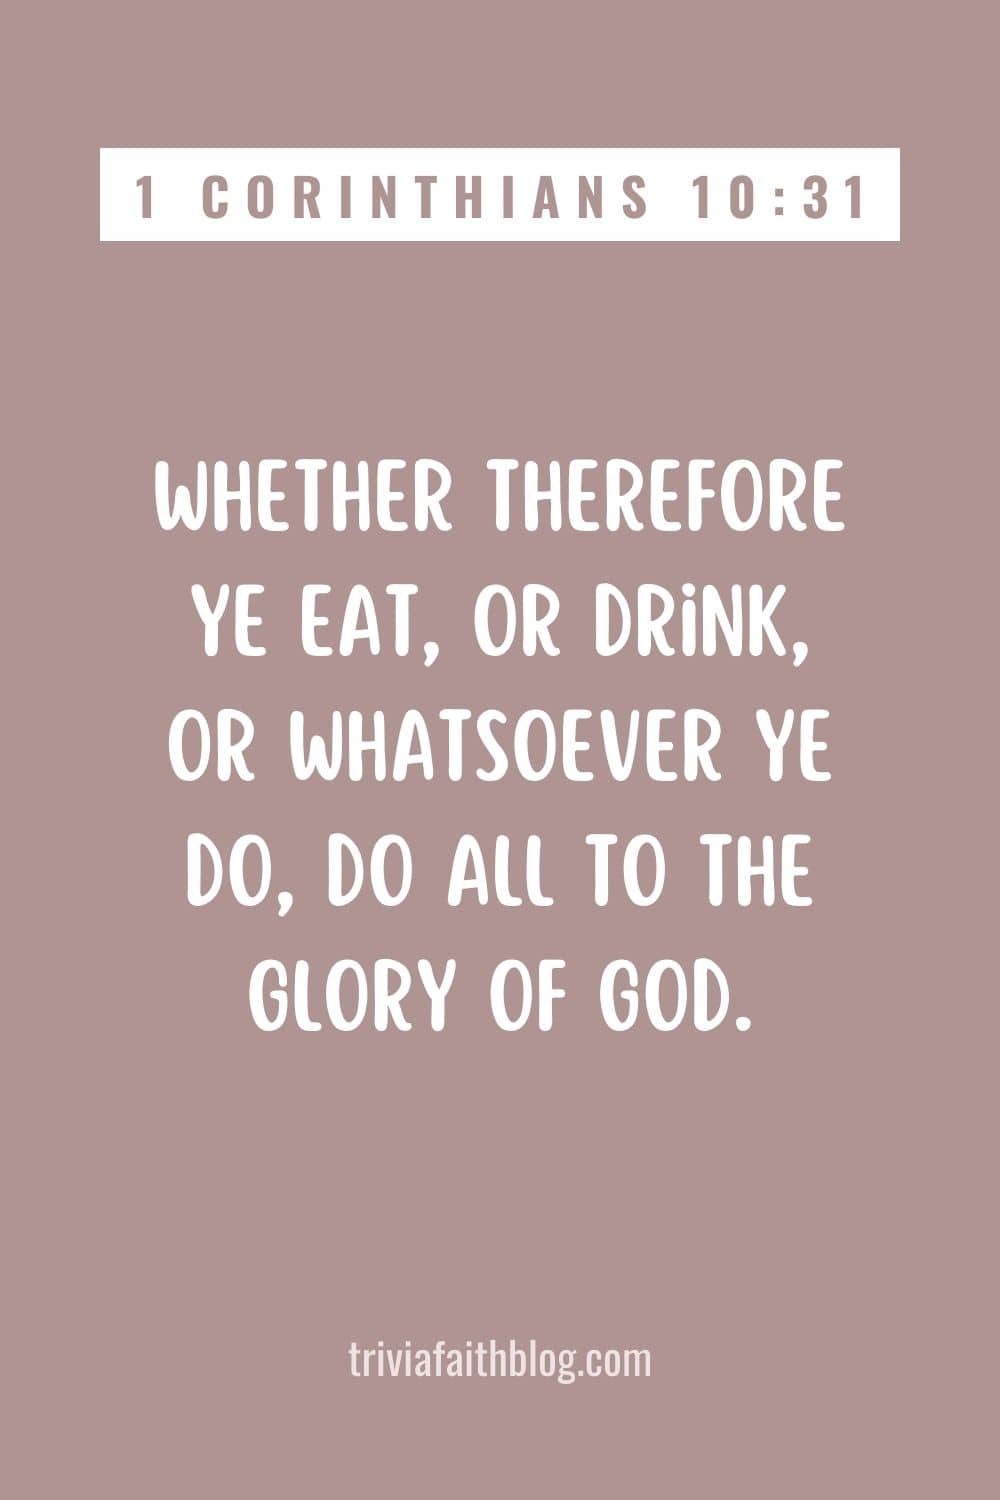 Whether therefore ye eat, or drink, or whatsoever ye do, do all to the glory of God